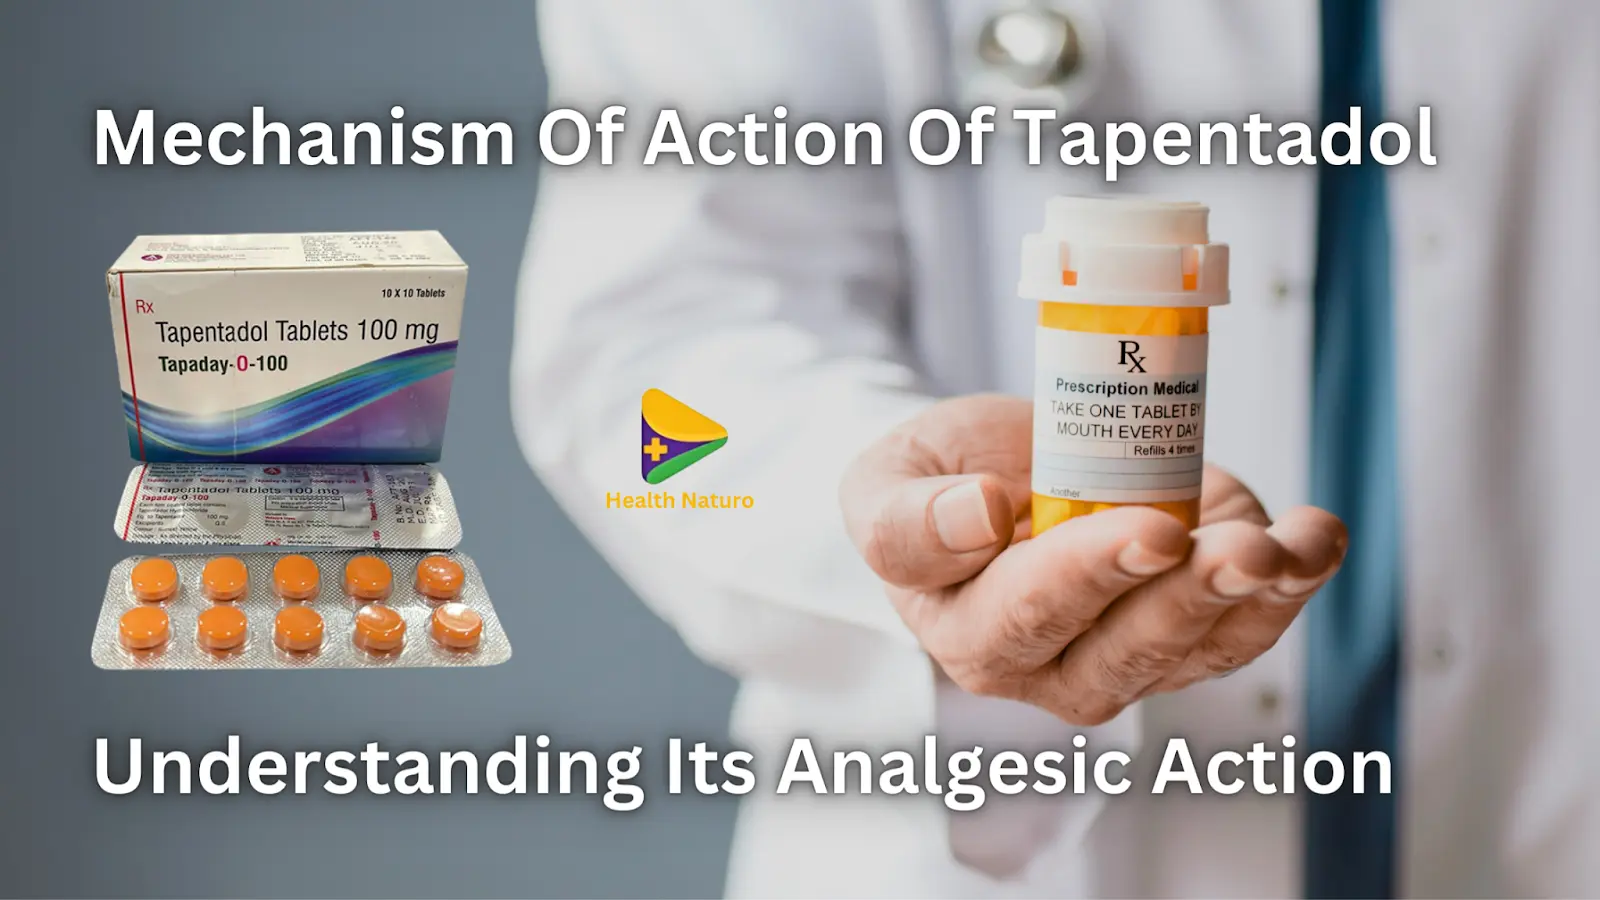 Mechanism Of Action Of Tapentadol- Understanding Its Analgesic Action